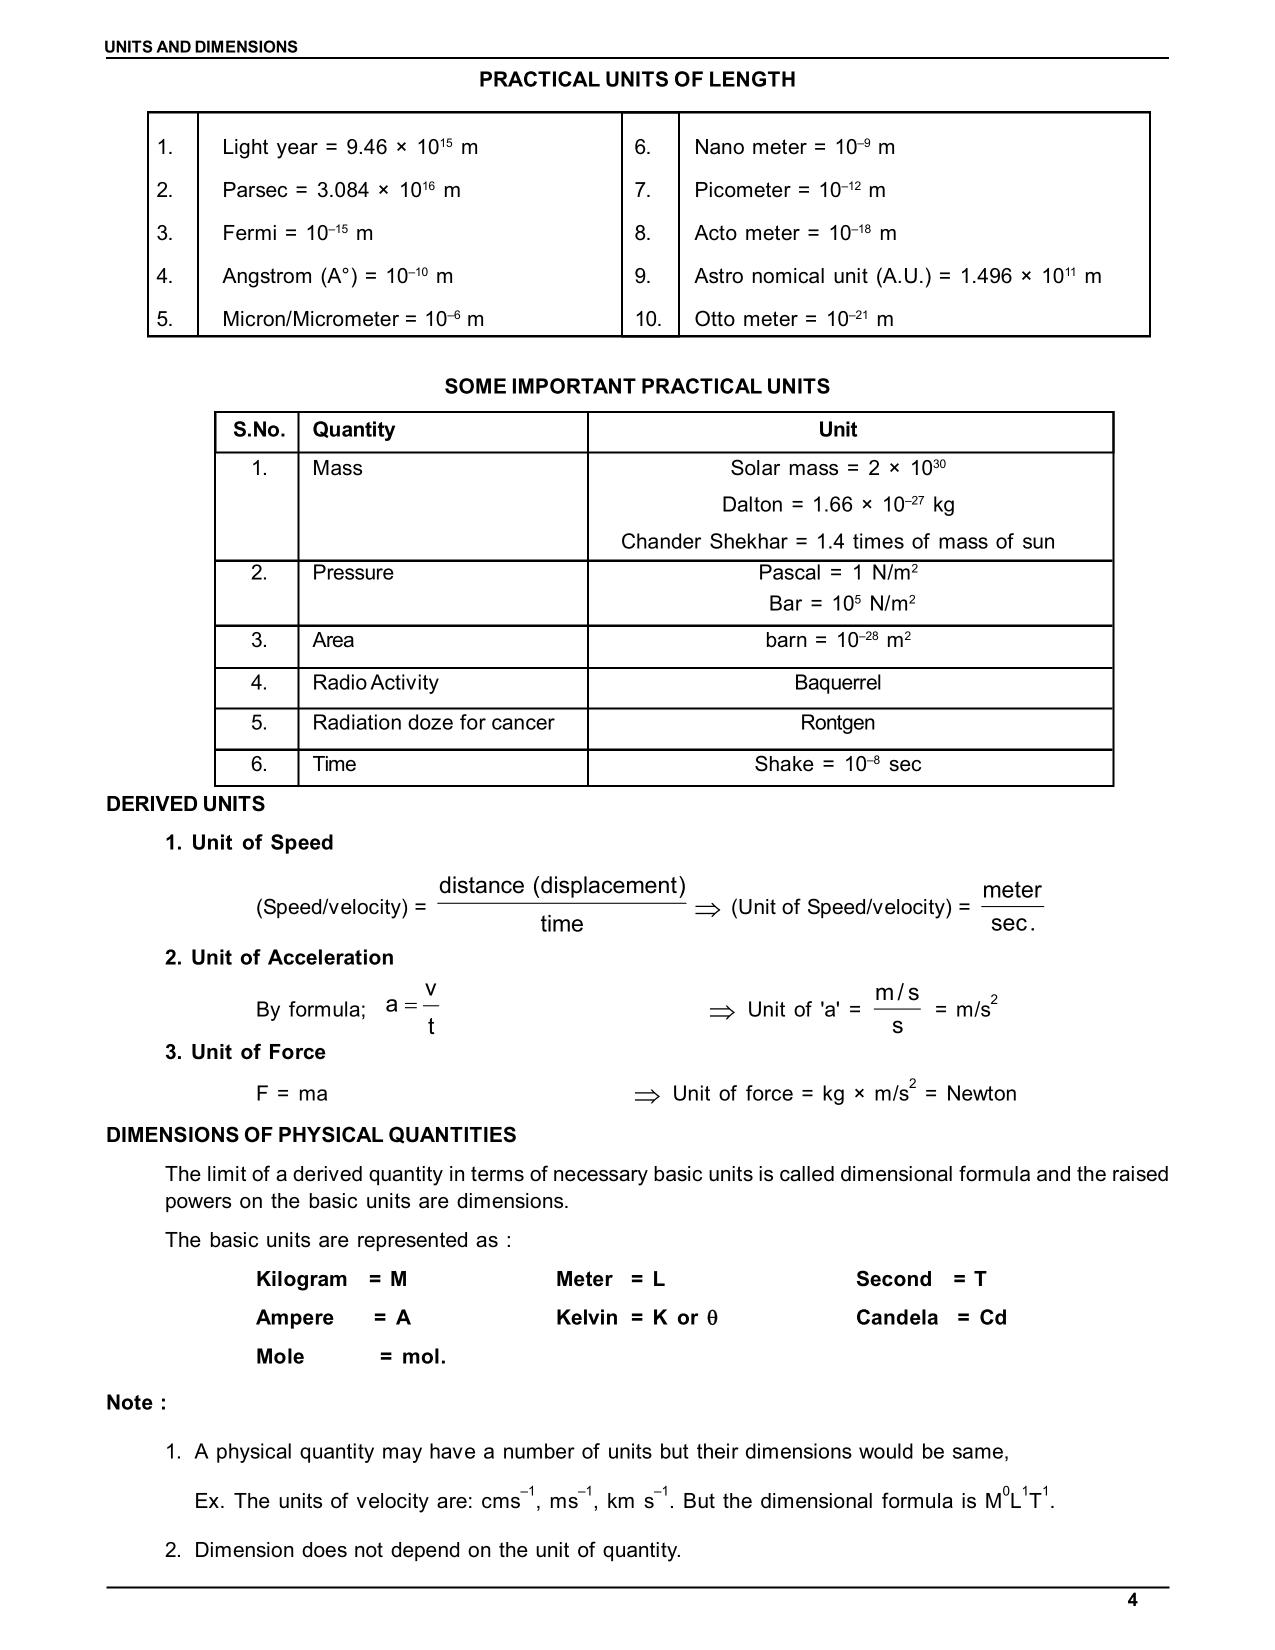 units and dimensions class 11 assignment